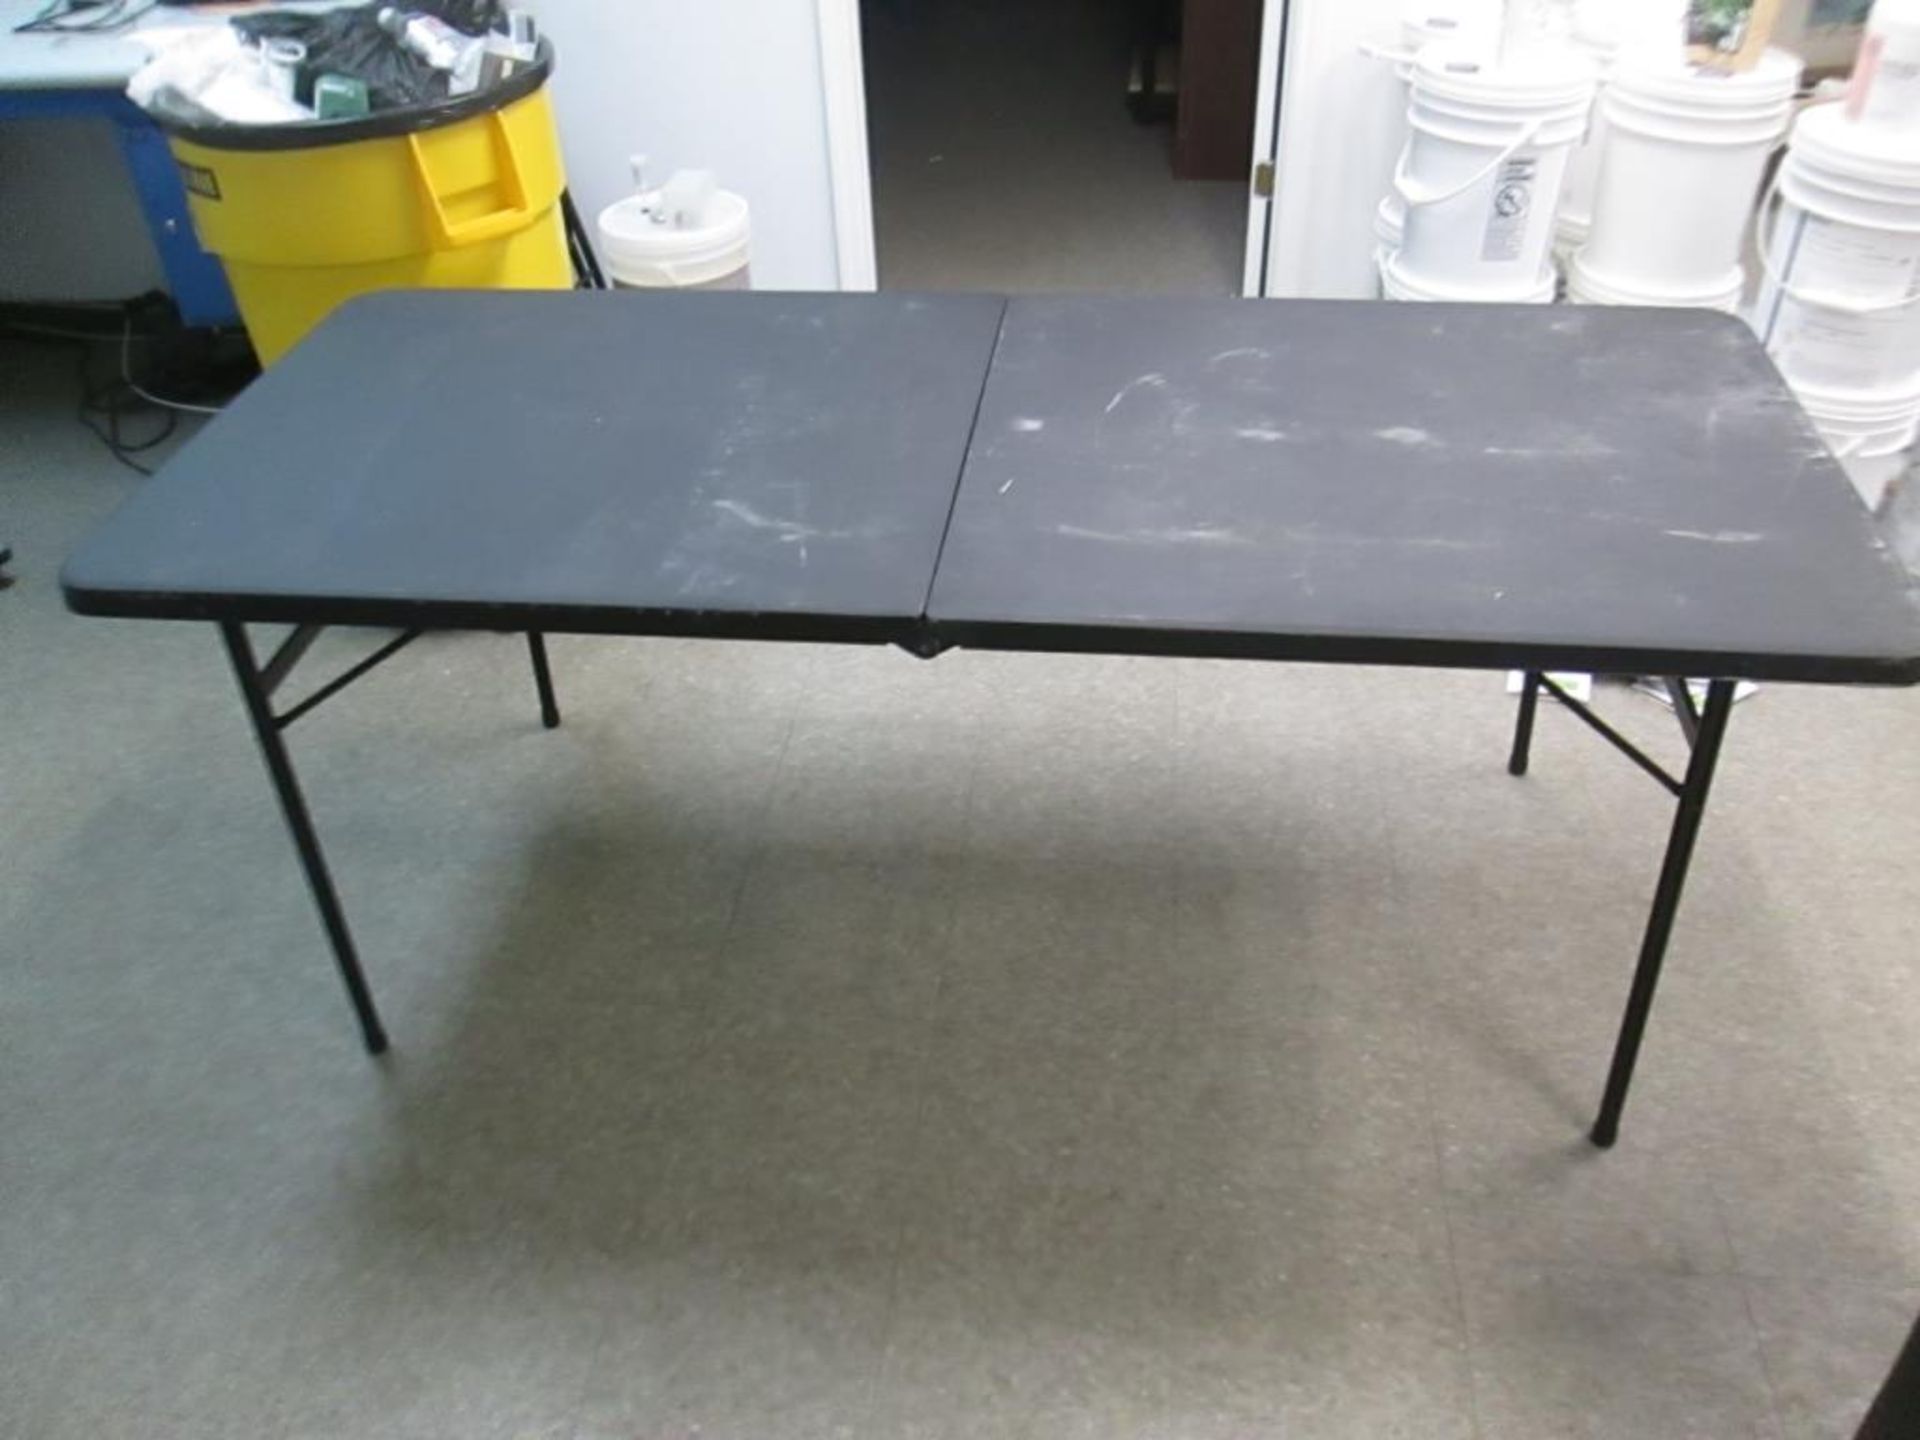 Adjustable Tables w/ Foldout Tables - Image 3 of 3